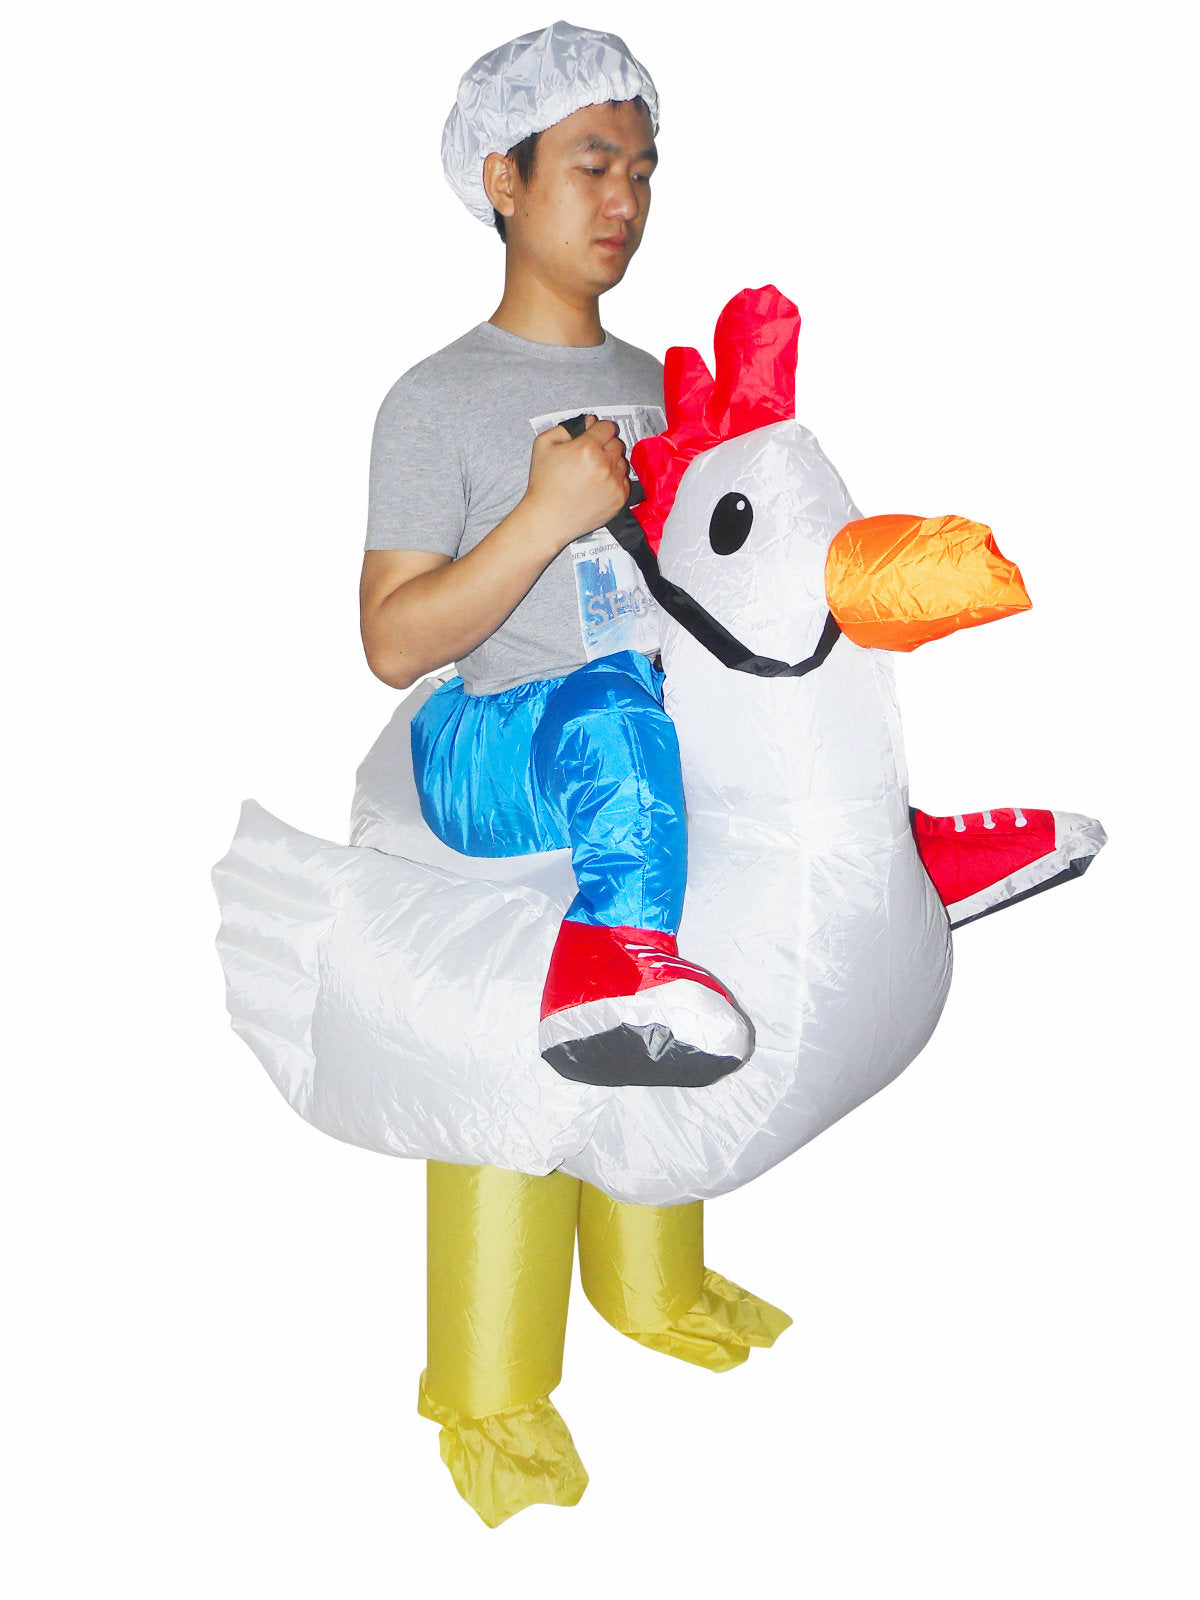 Chicken Cowboy Inflatable Fun Costume Adult Size